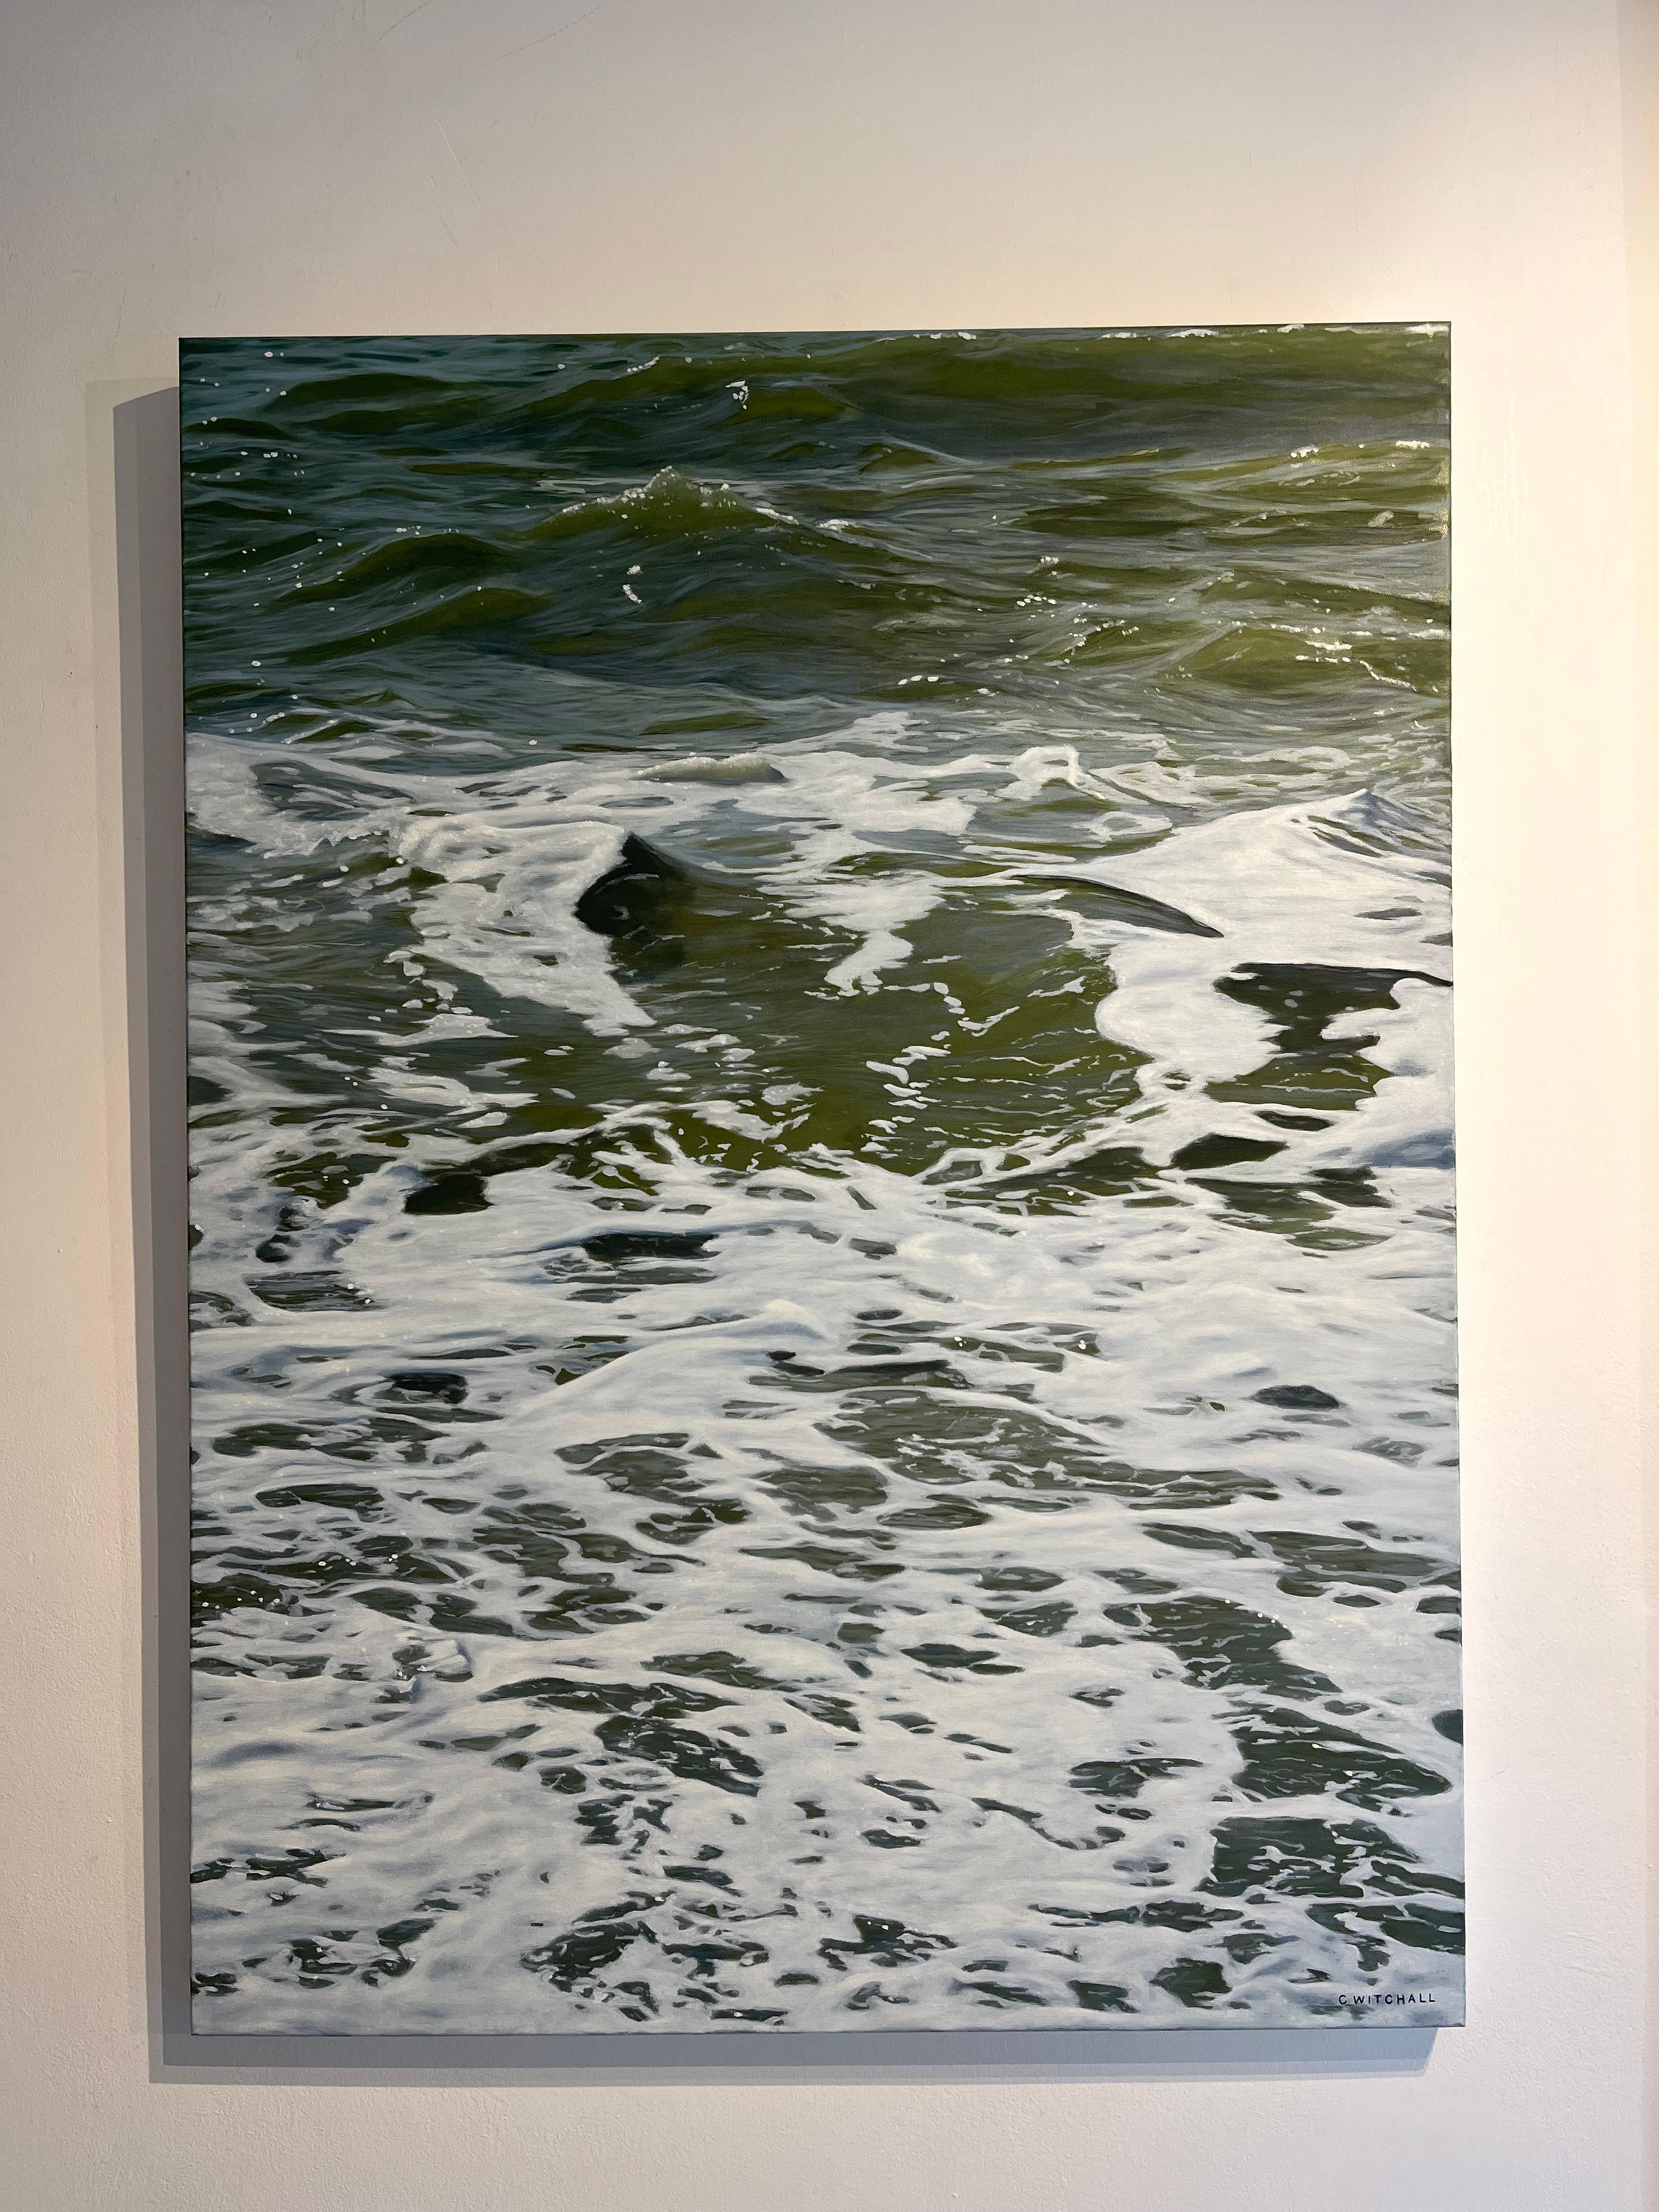 Lullaby-original modern Hyper realism seascape oil painting-contemporary Art - Painting by Christopher Witchall